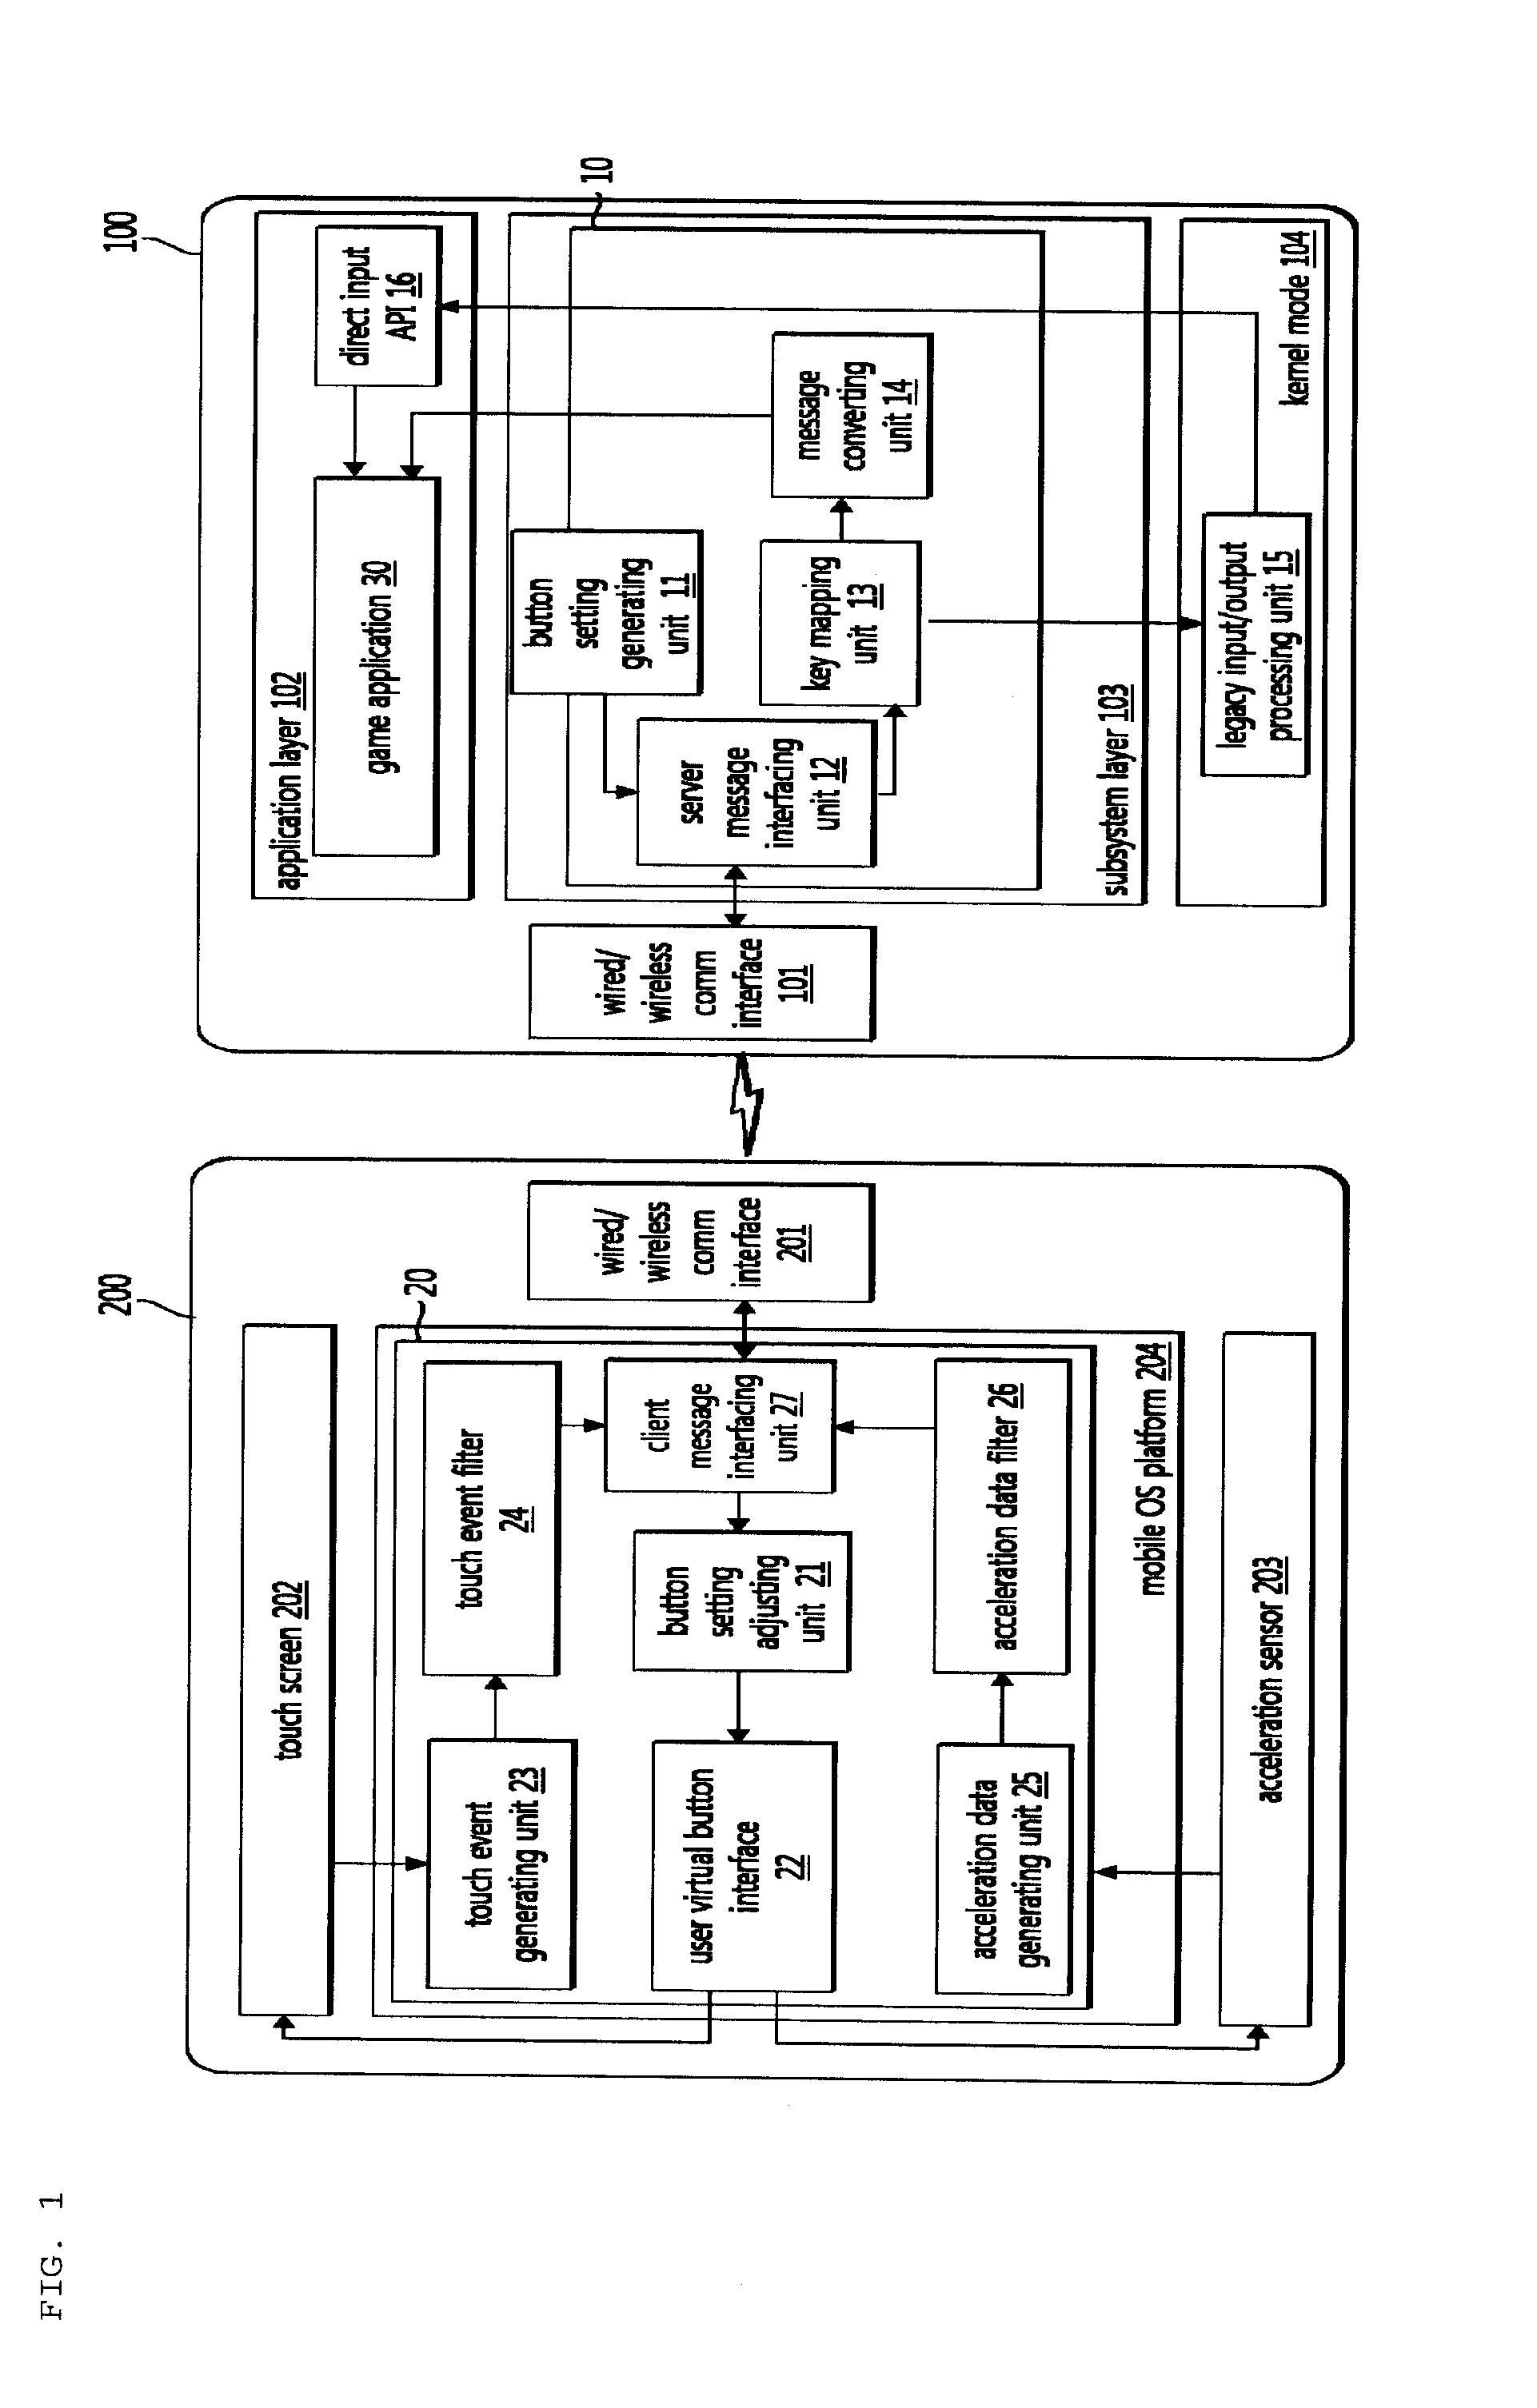 Mobile terminal-based virtual game controller and remote control system using the same